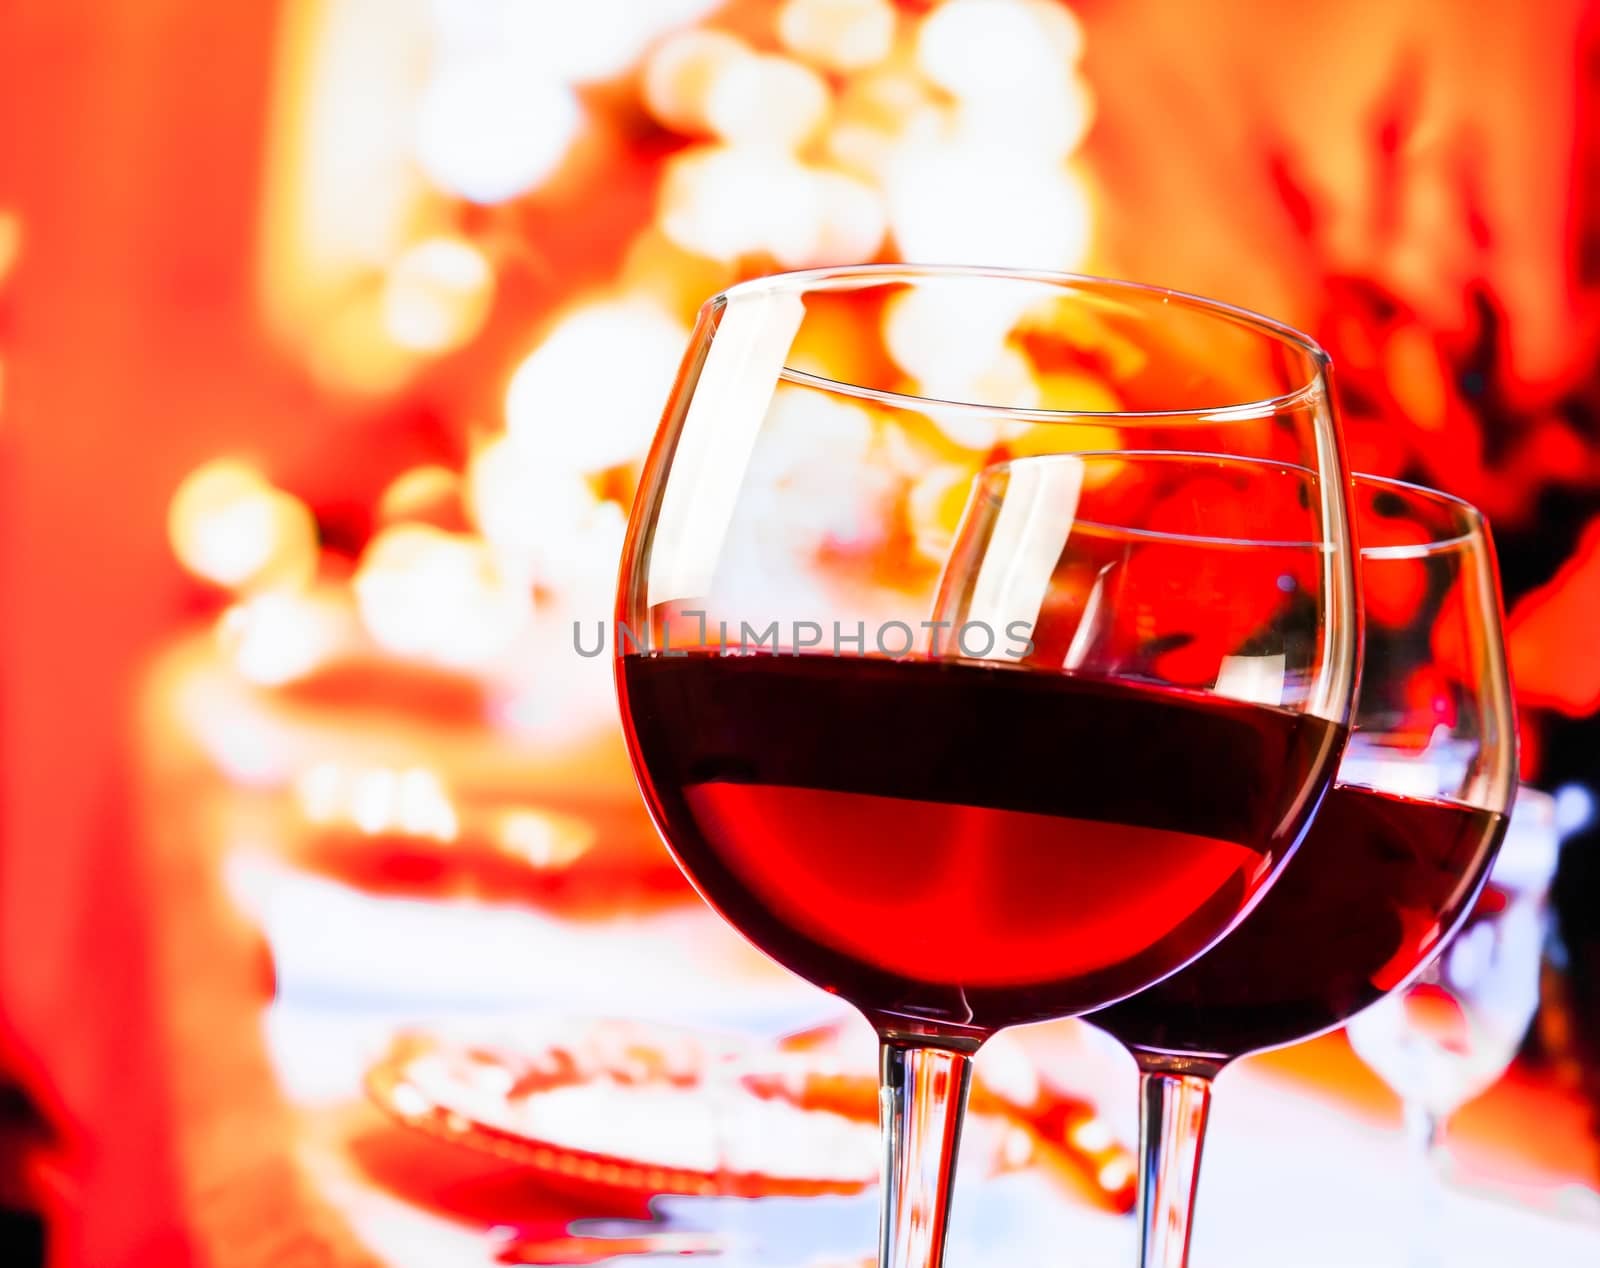 two red wine glasses against unfocused restaurant table background by donfiore